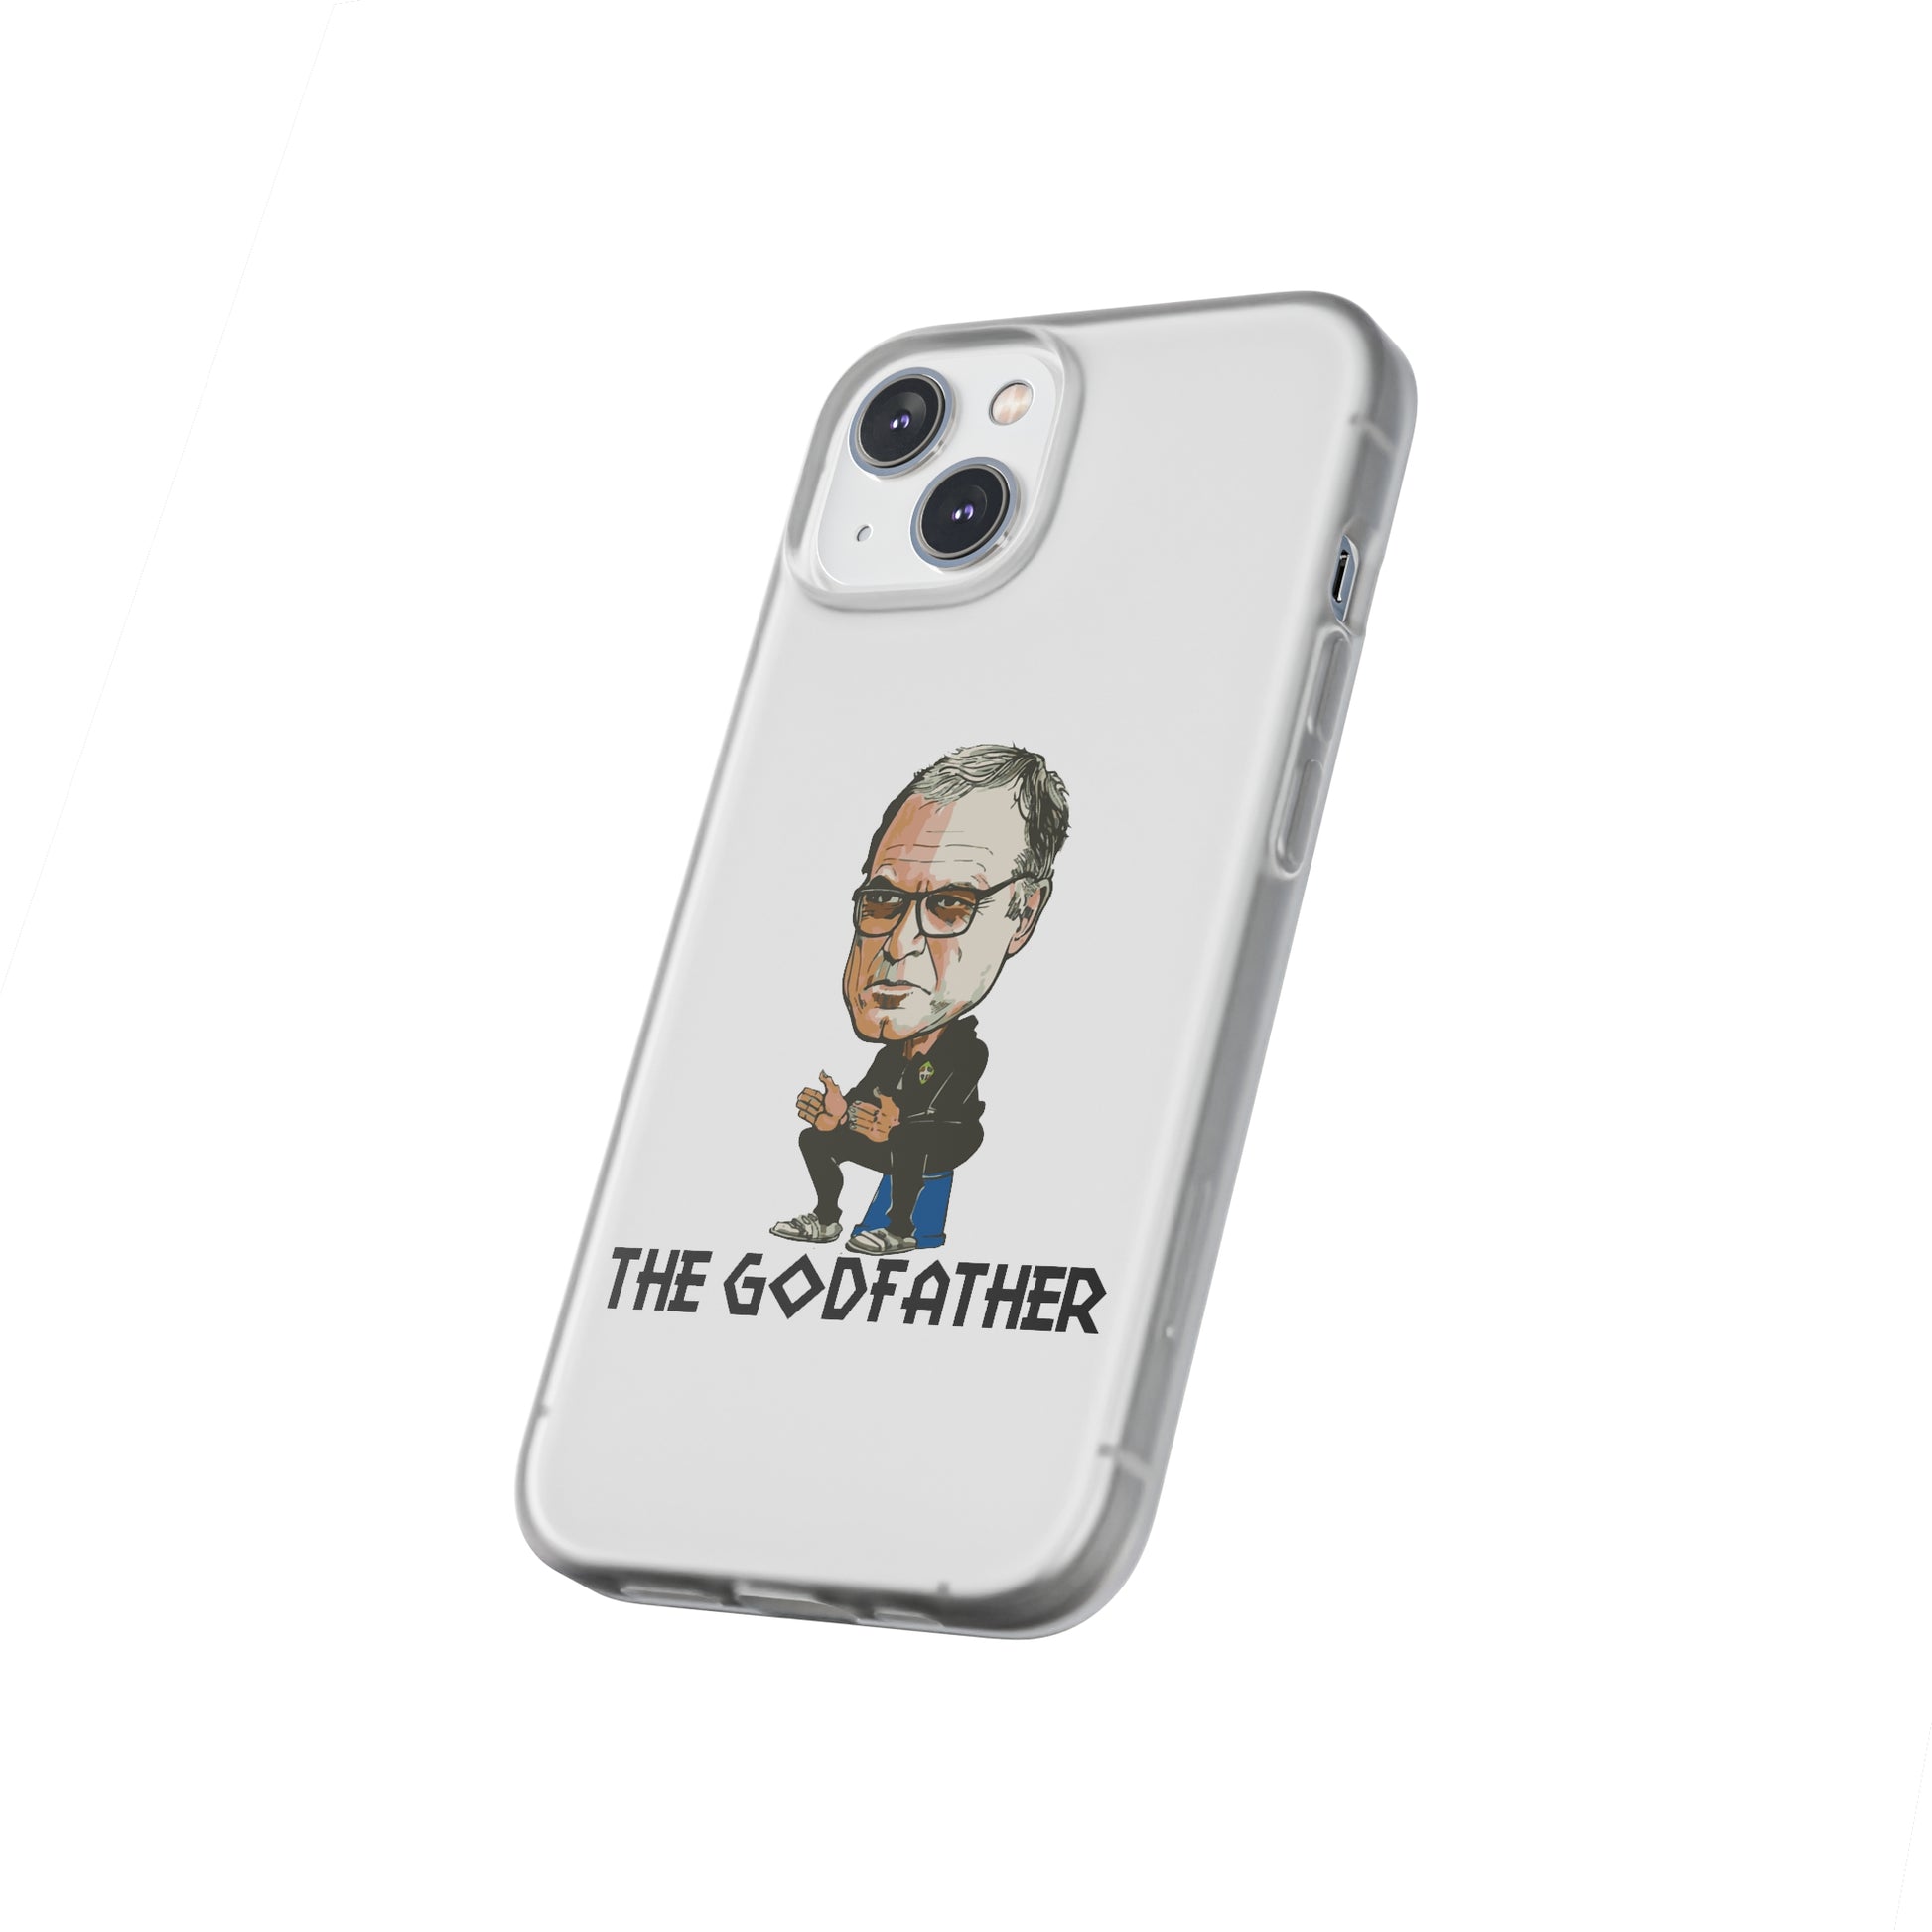 Phone case for leeds united supporters